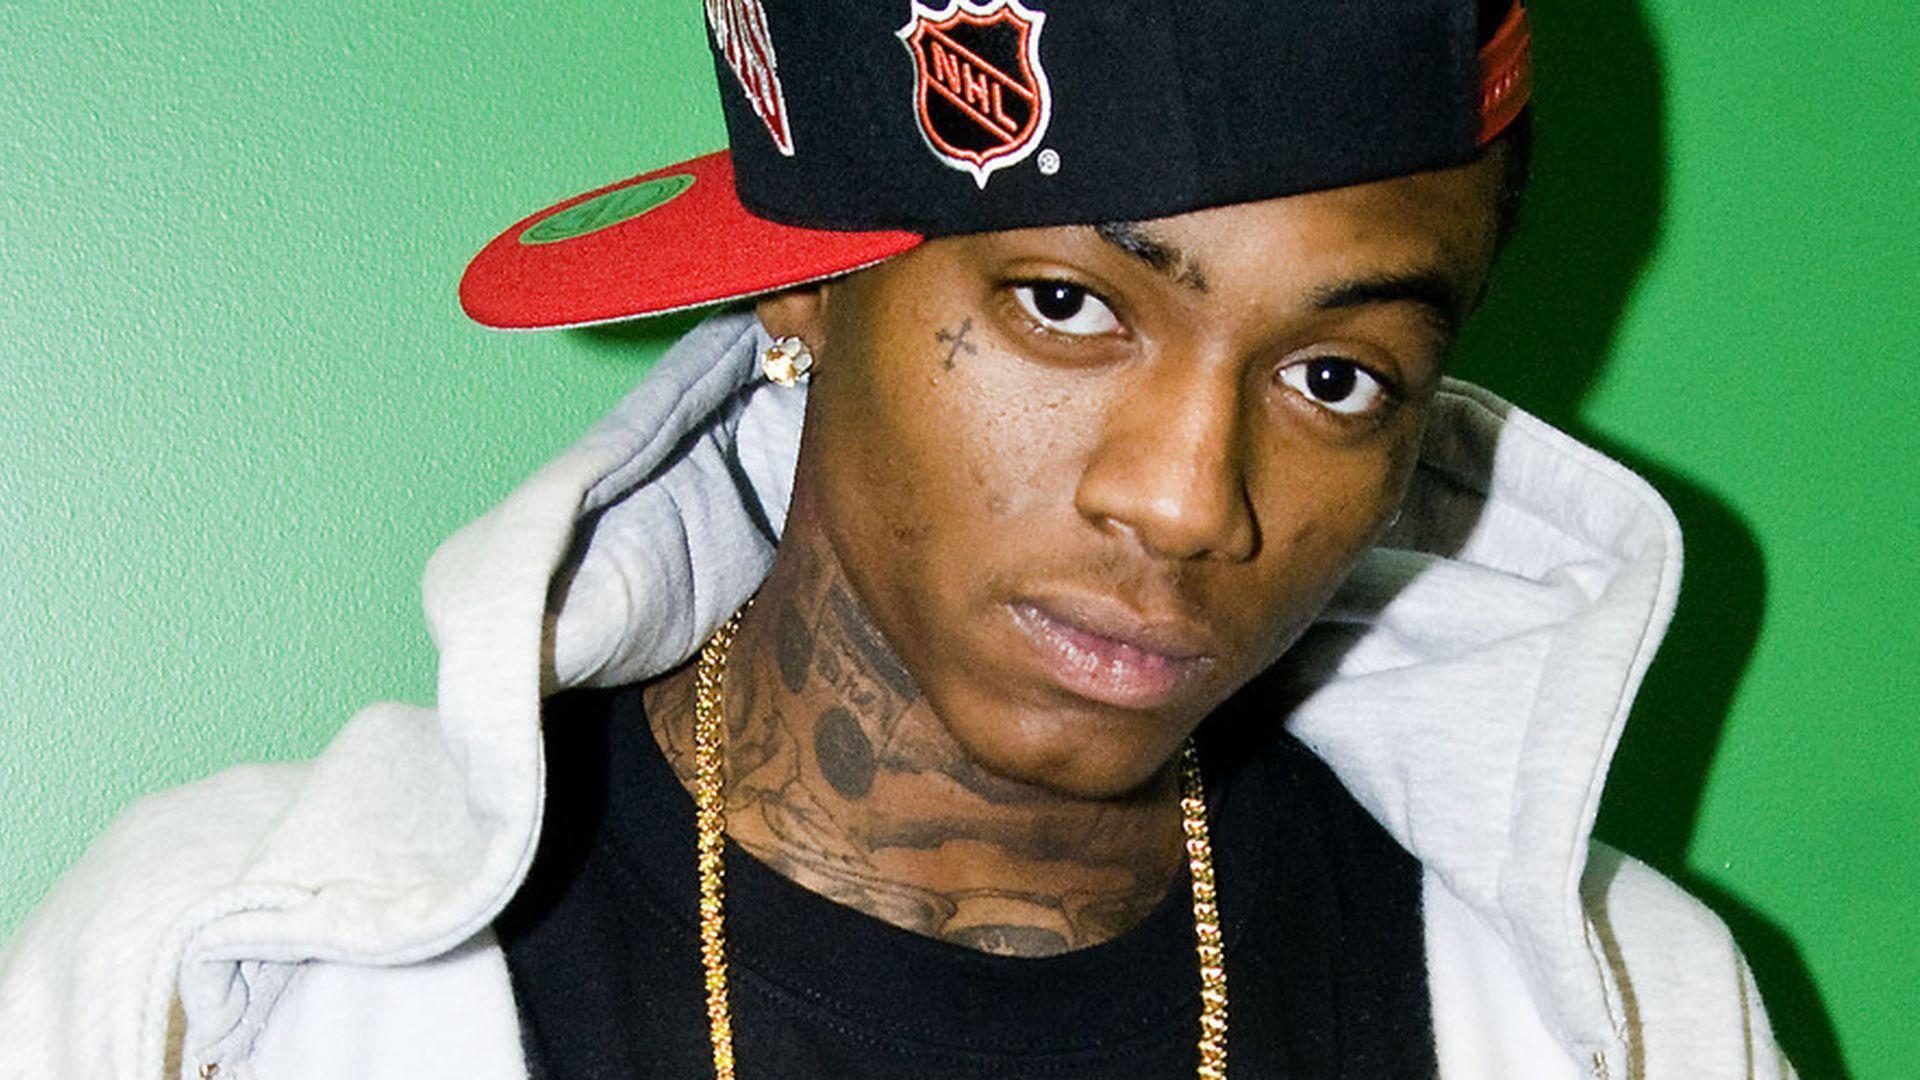 Soulja Boy Wallpapers Image Photos Pictures Backgrounds.